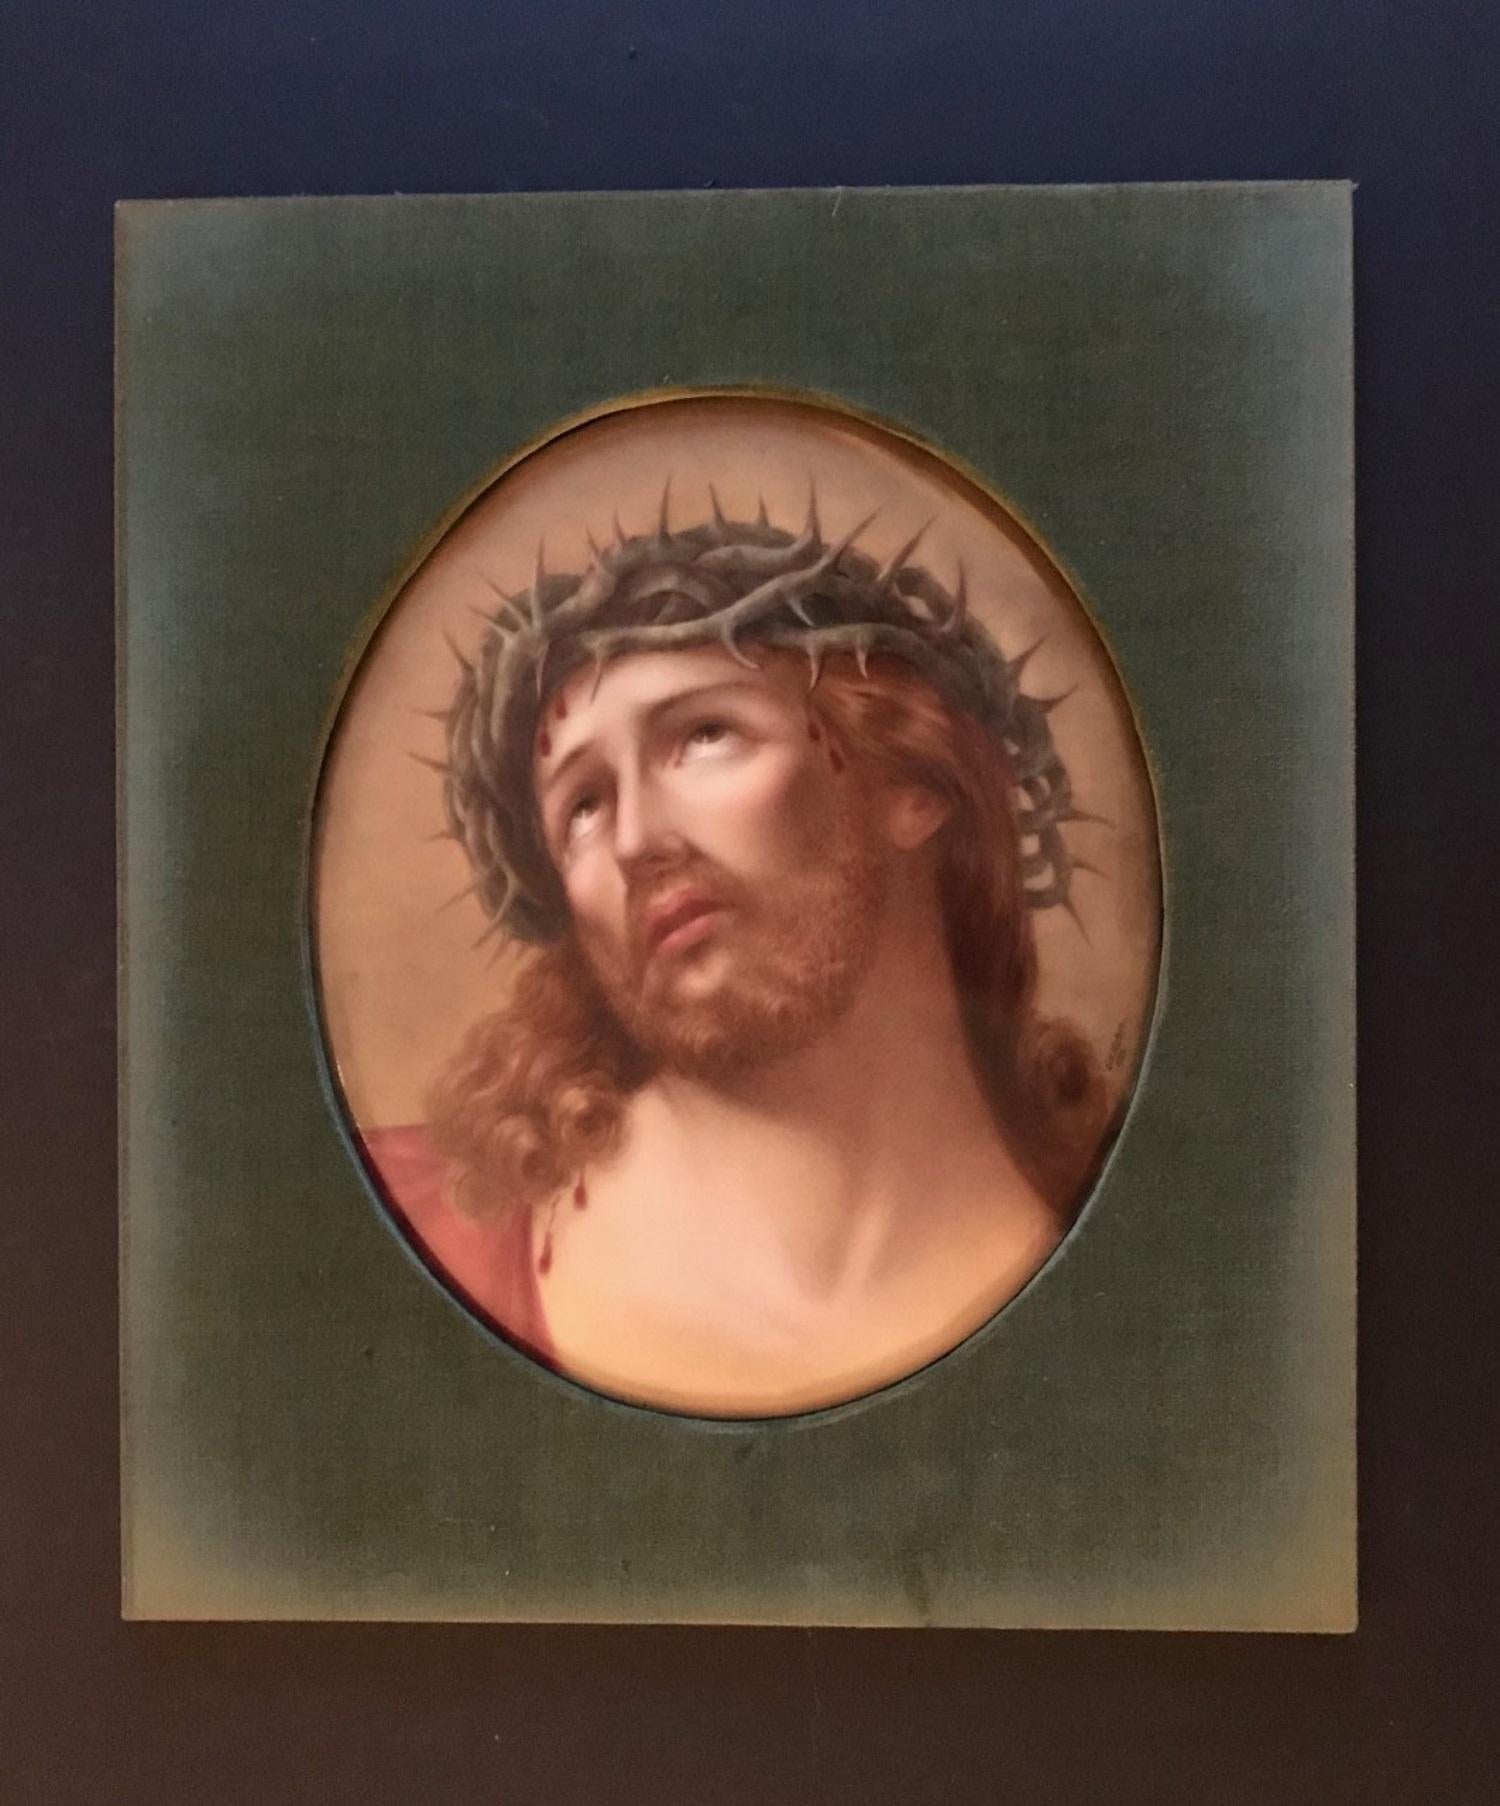 This is a superb portrait of Christ. It is hand painted in extraordinary quality with polychrome enamel on an oval porcelain plaque after the original painting -Head of Christ- by the Italian artist Guido Reni (1575-1642). The plaque is signed O.W.